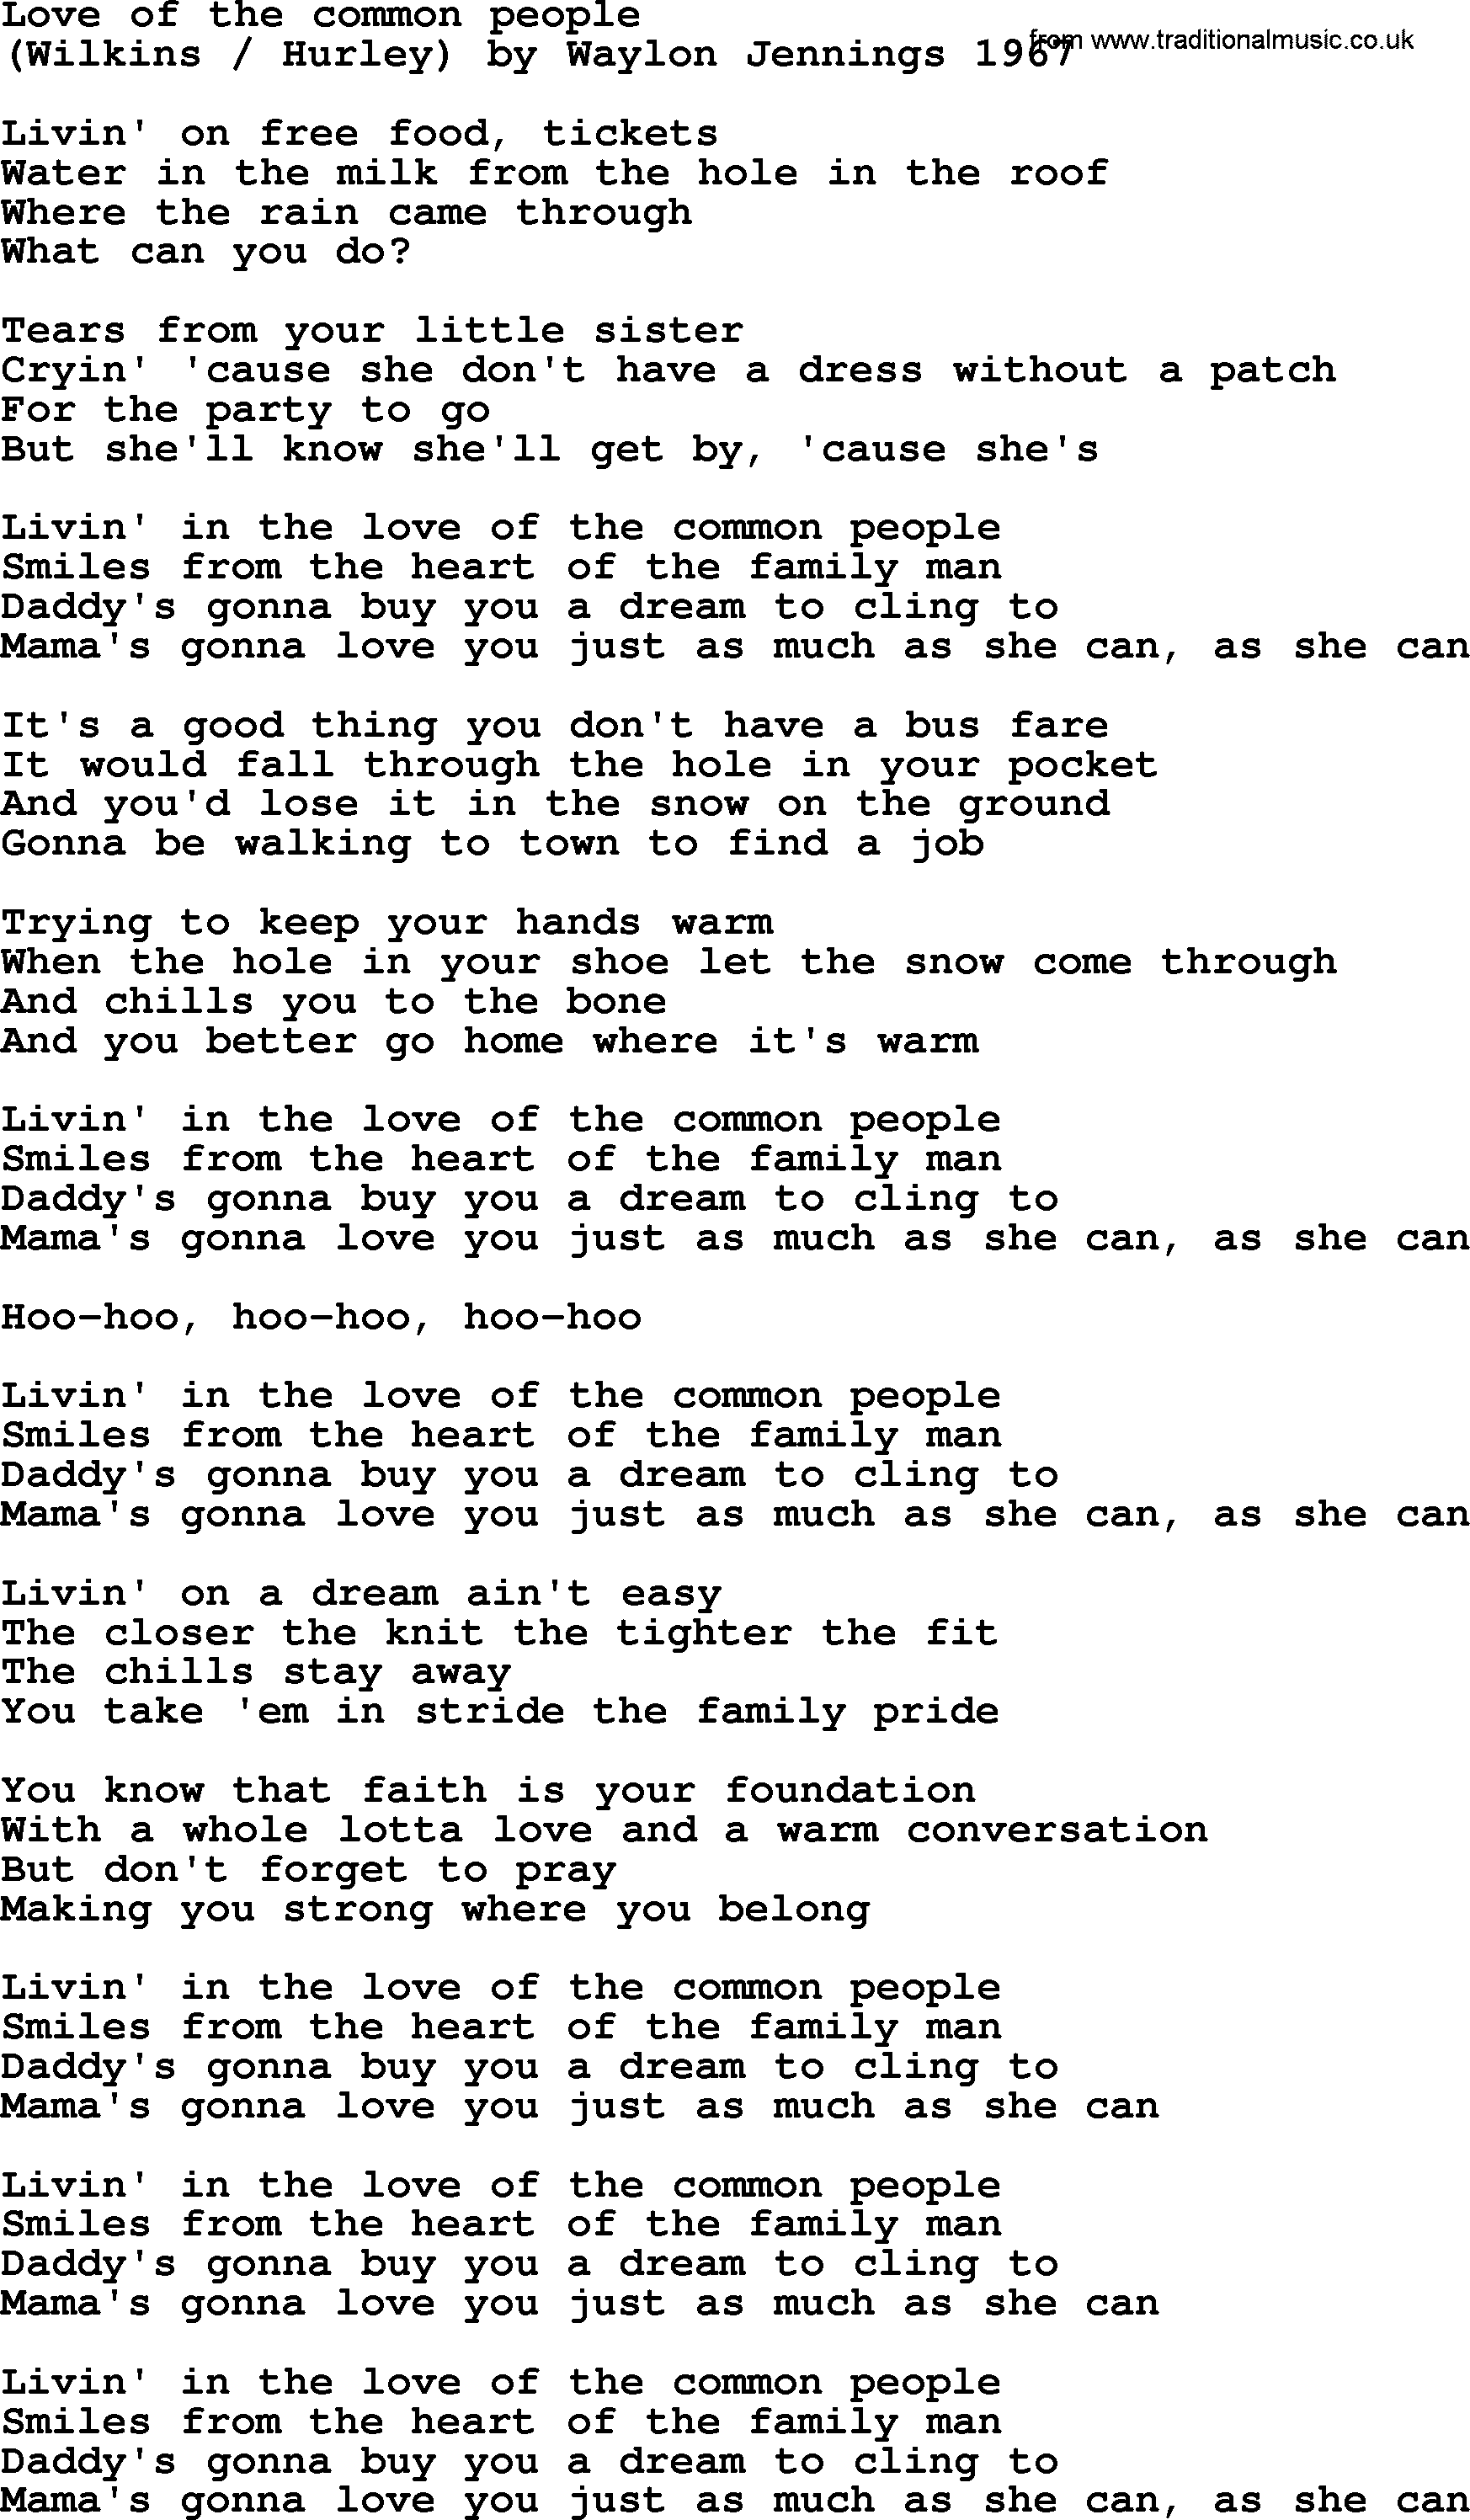 Bruce Springsteen song: Love Of The Common People lyrics